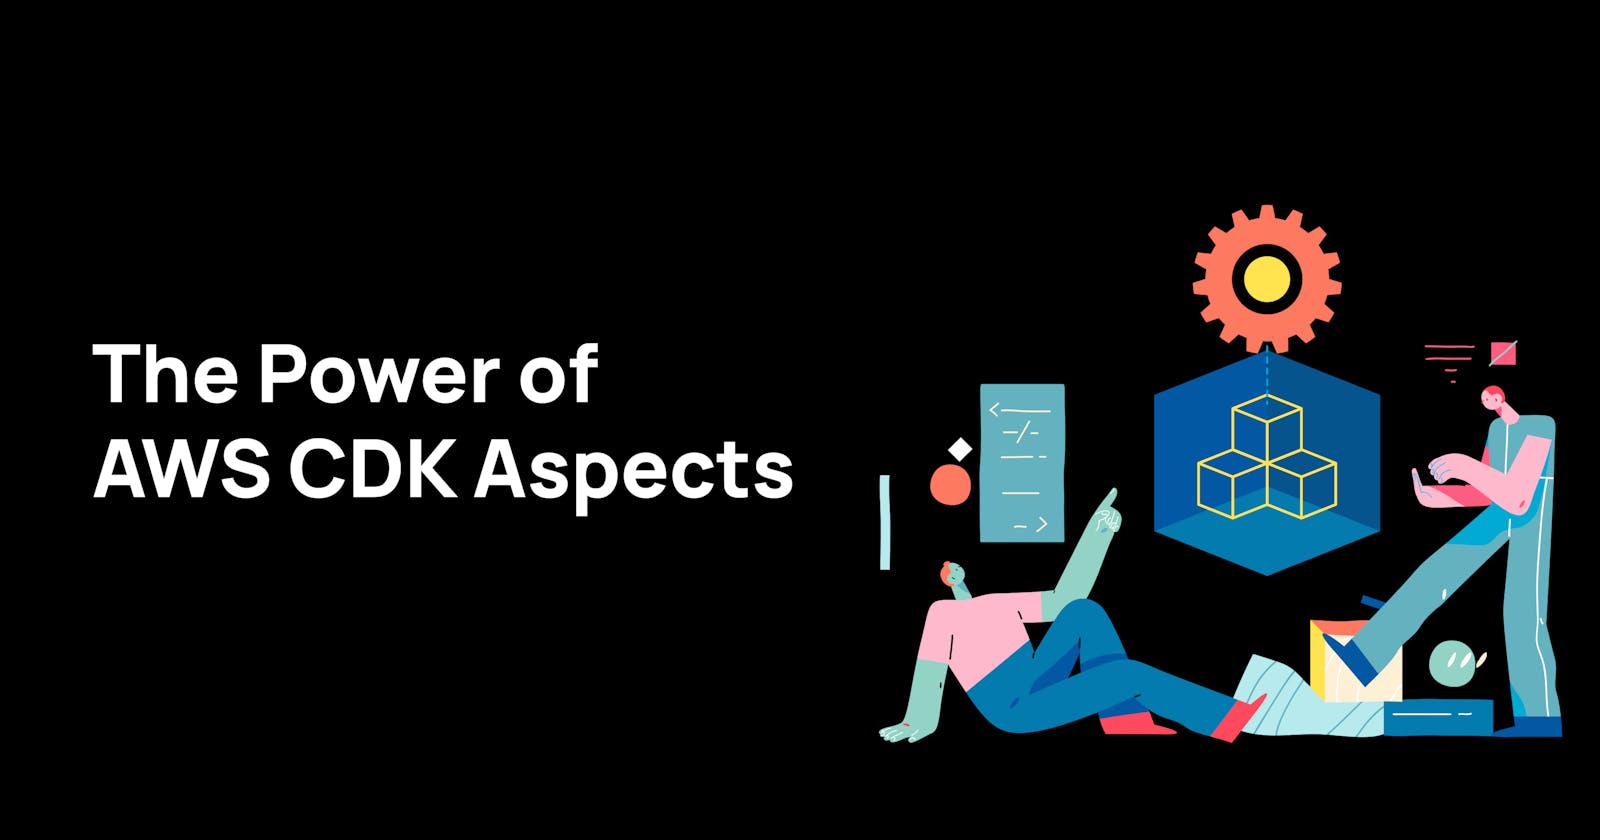 The Power of AWS CDK Aspects